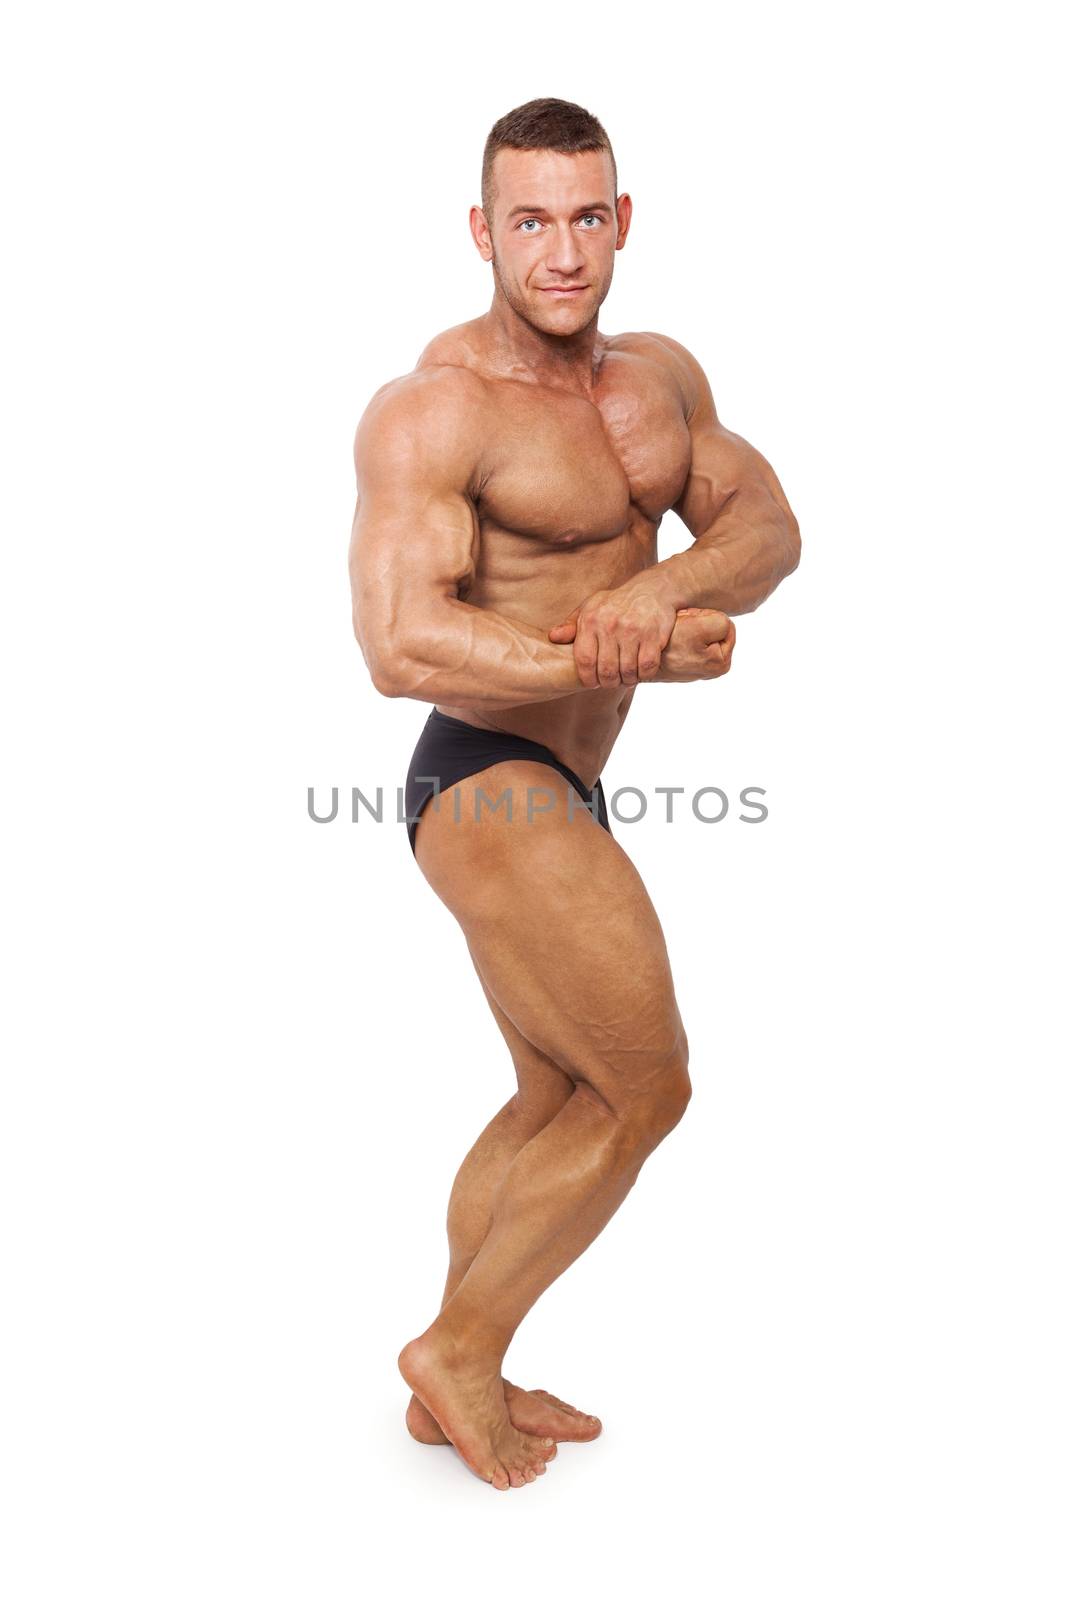 Sexy shirtless muscular bodybuilder posing isolated on white background. Sports and fitness.